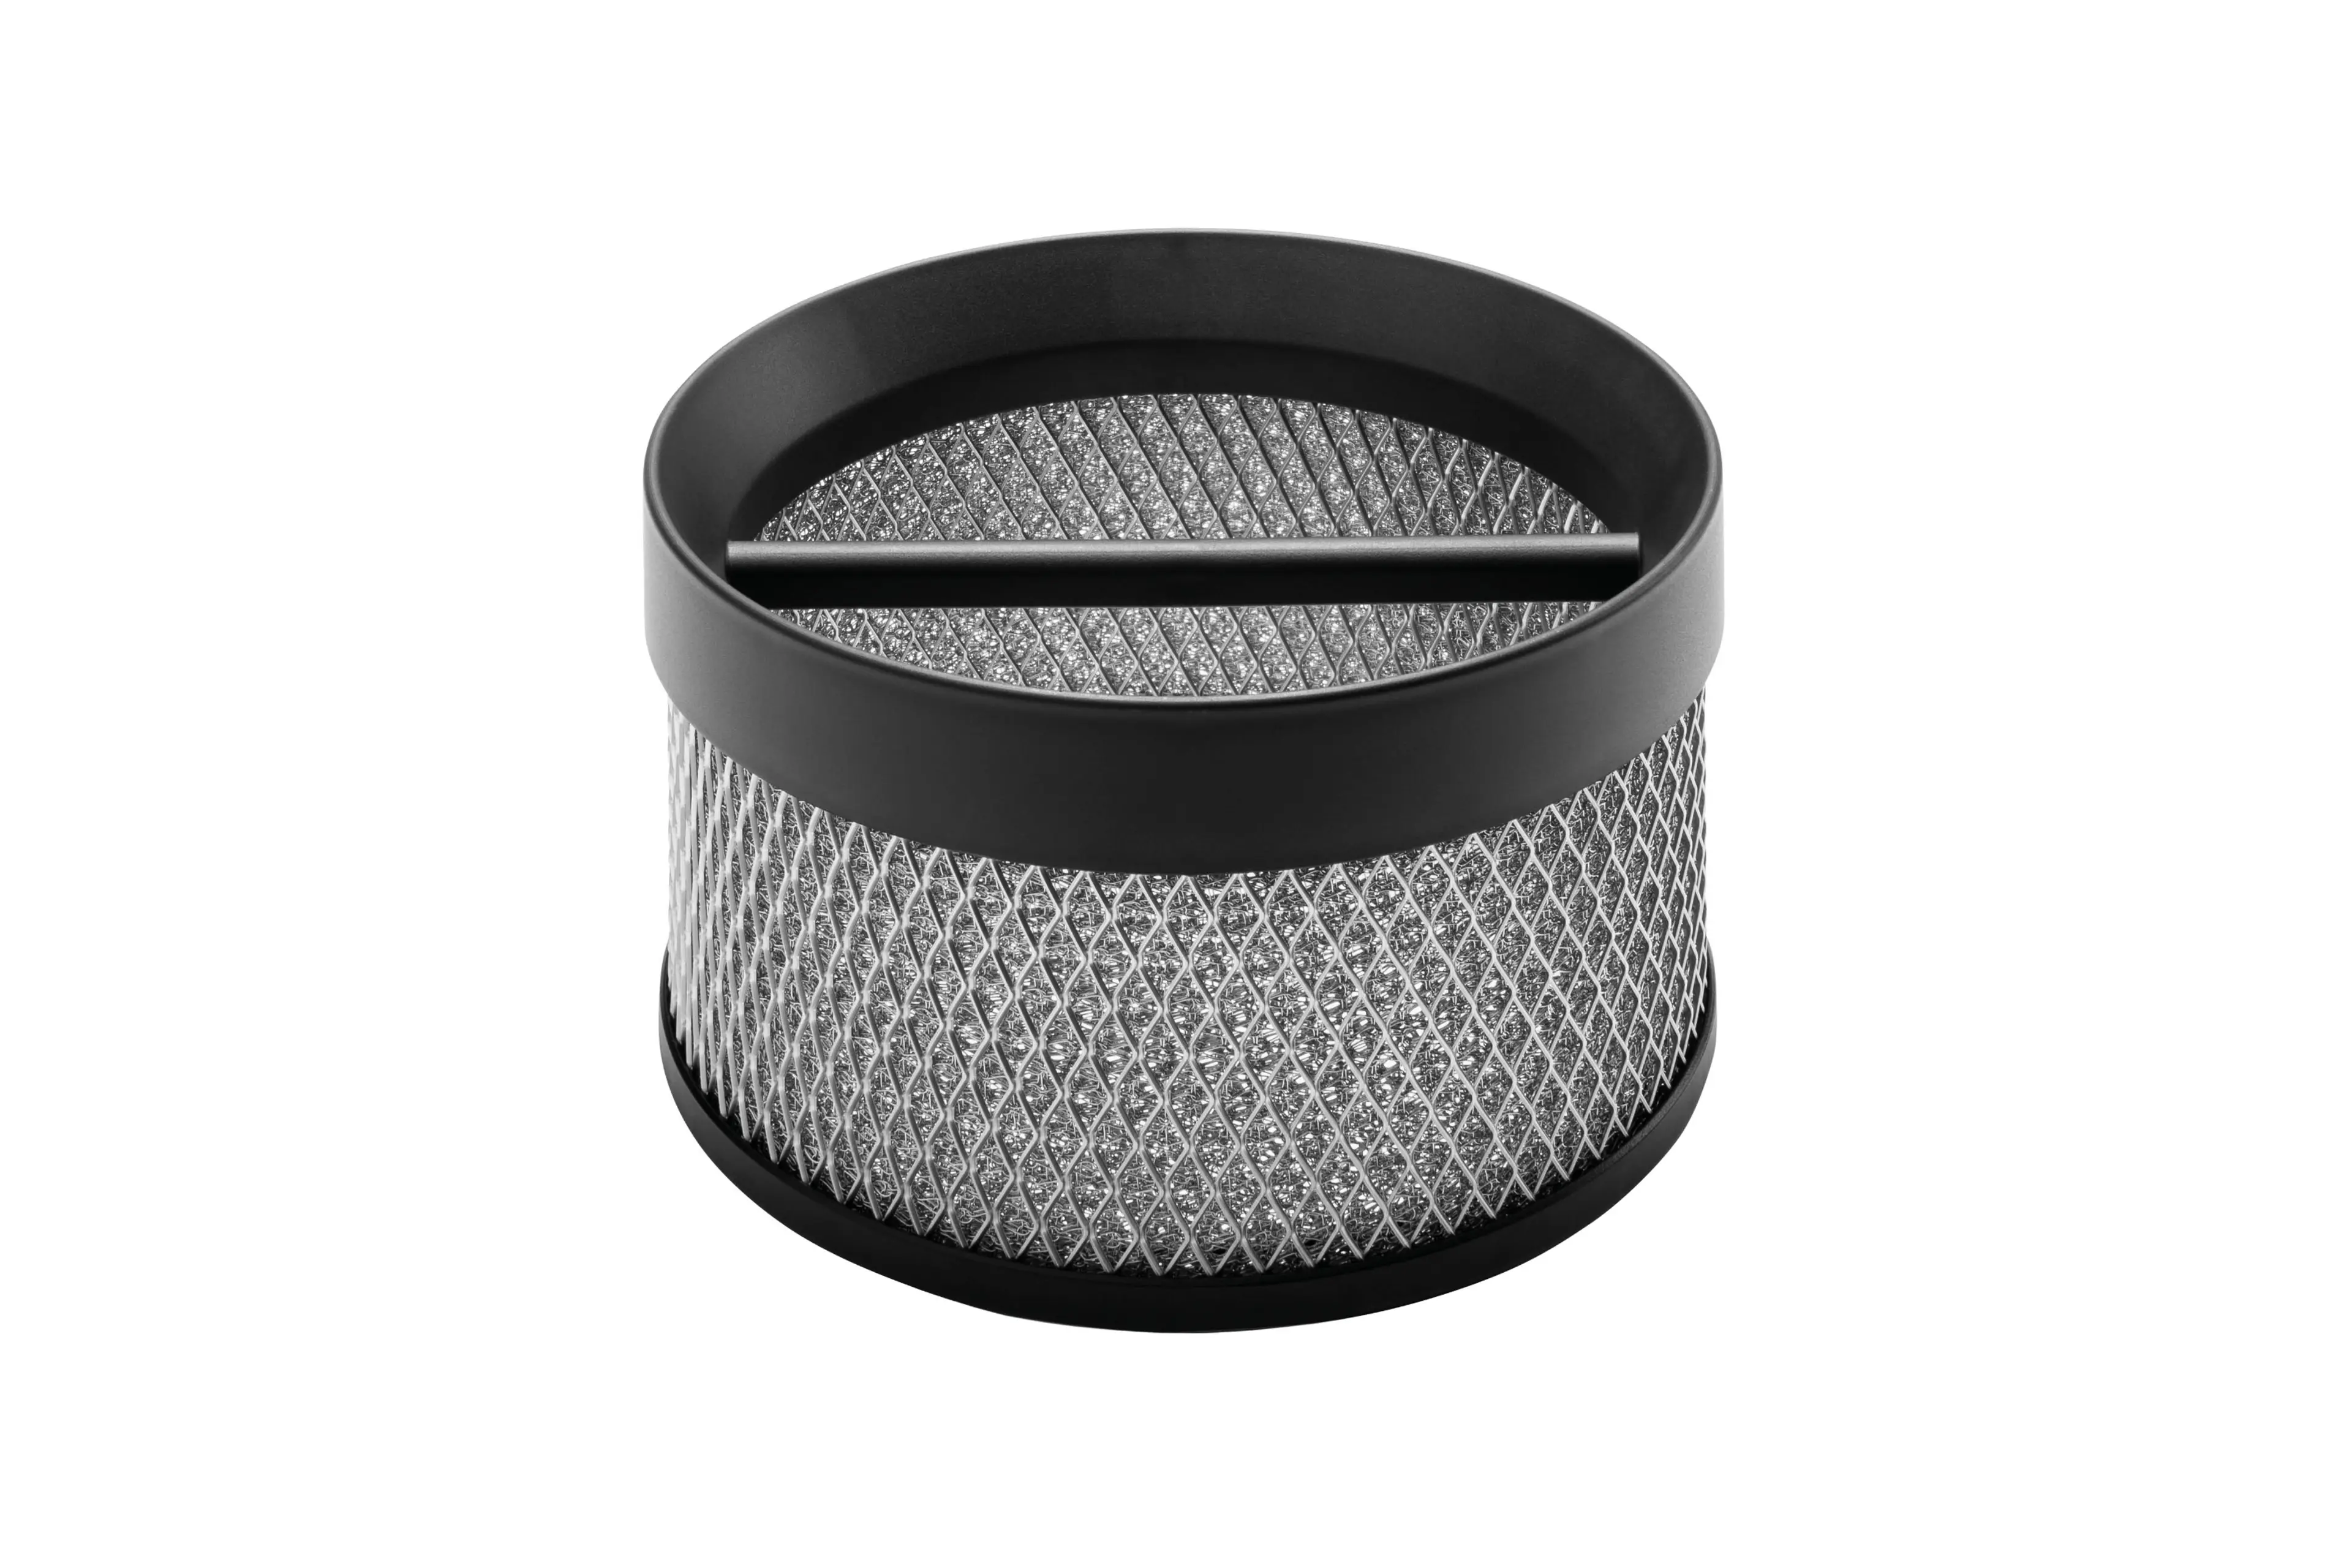 Stainless steel grease filter Basic